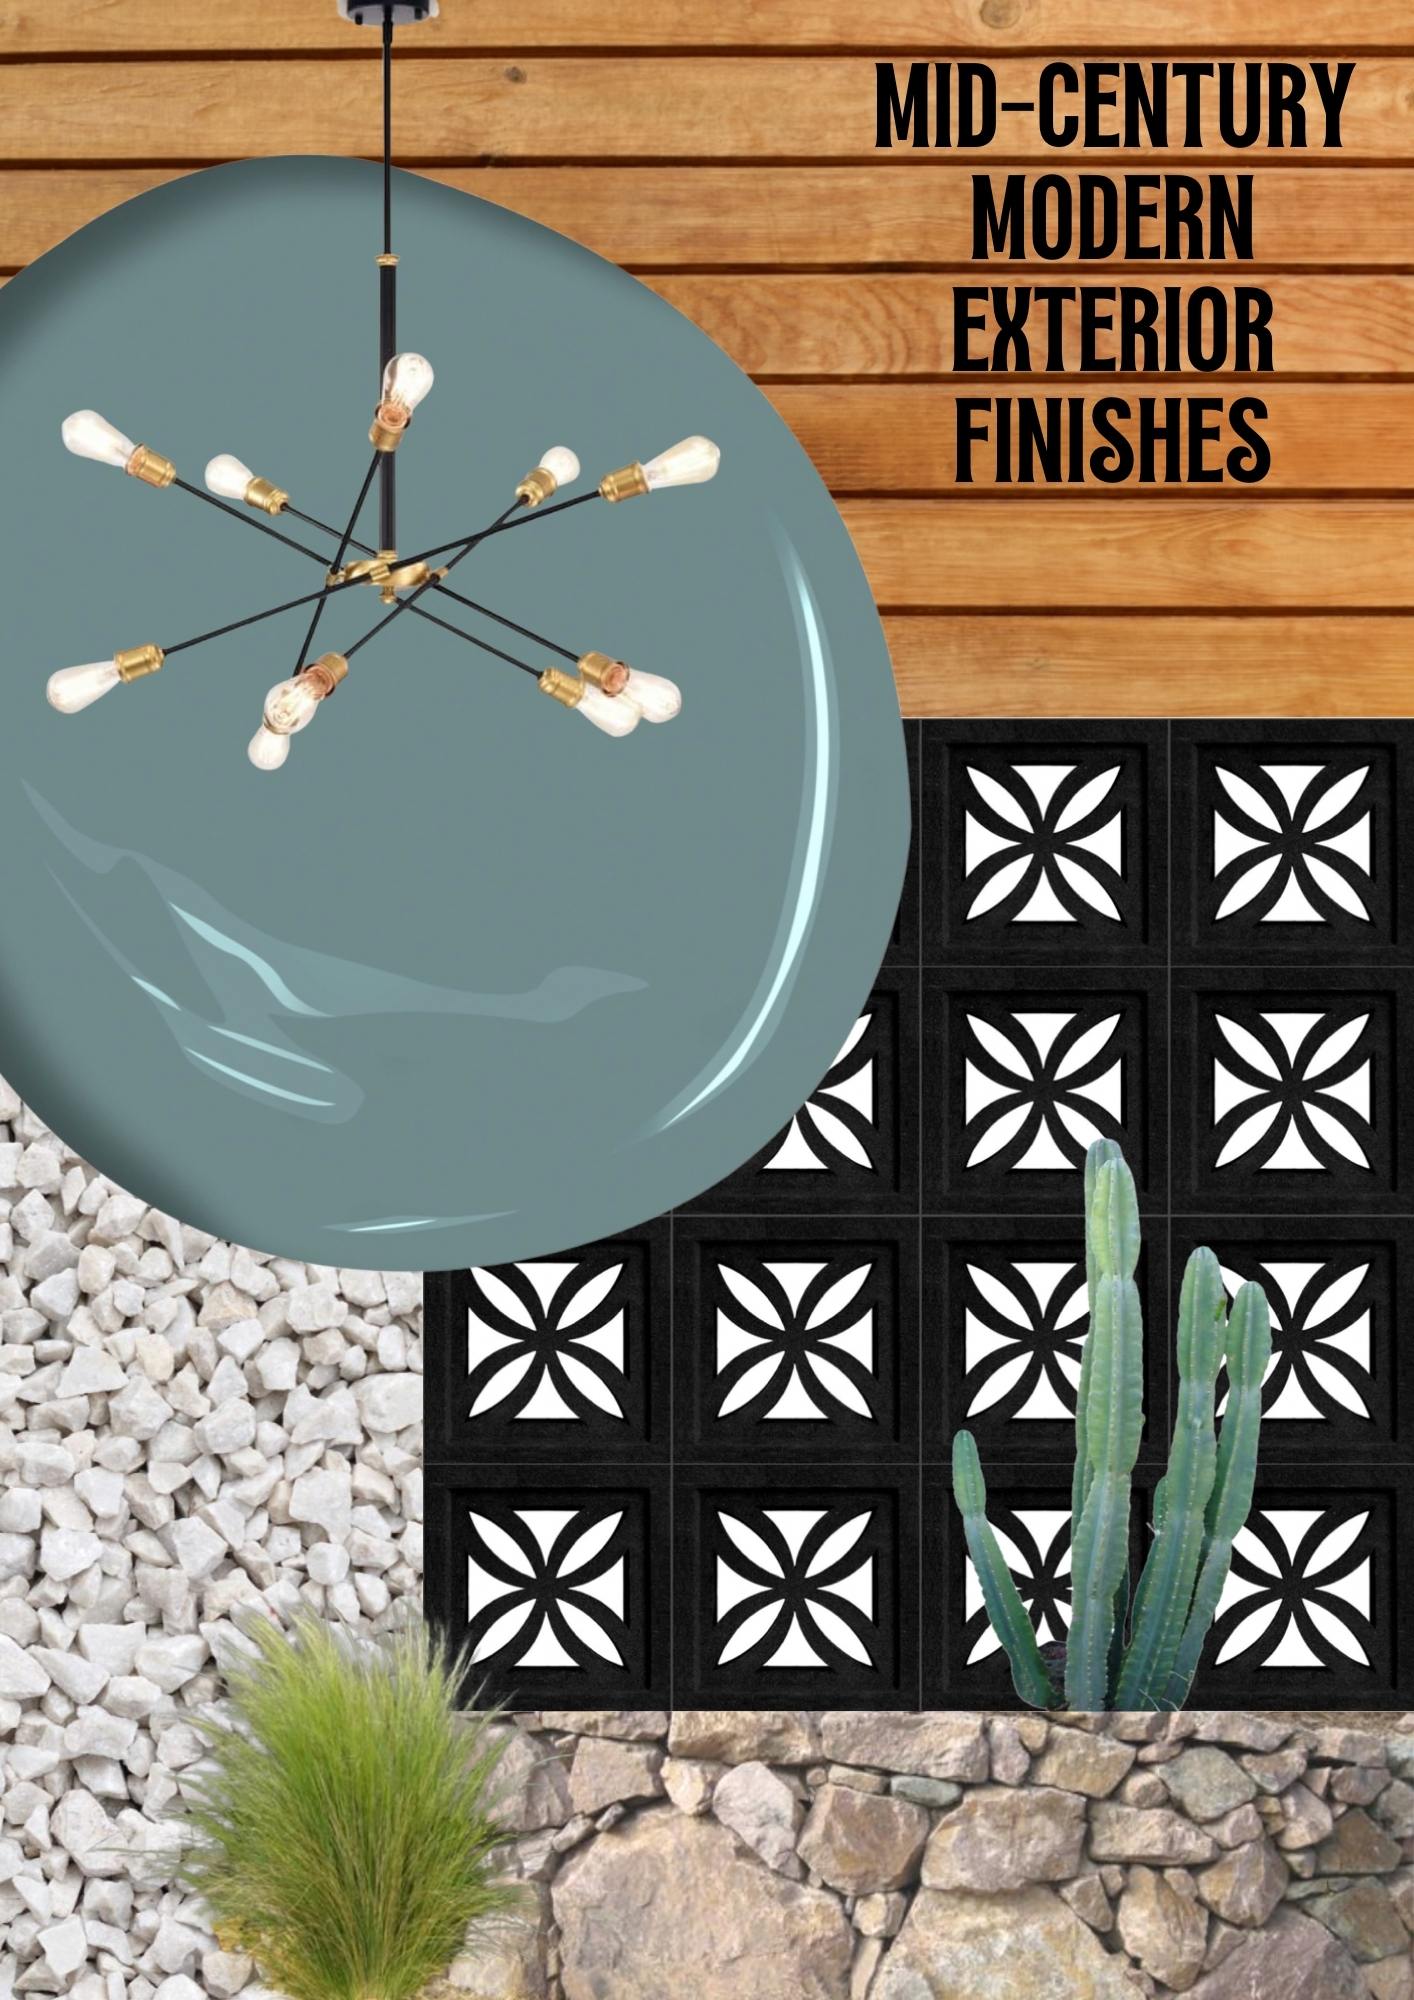 Mid-Century Modern Exterior Finishes